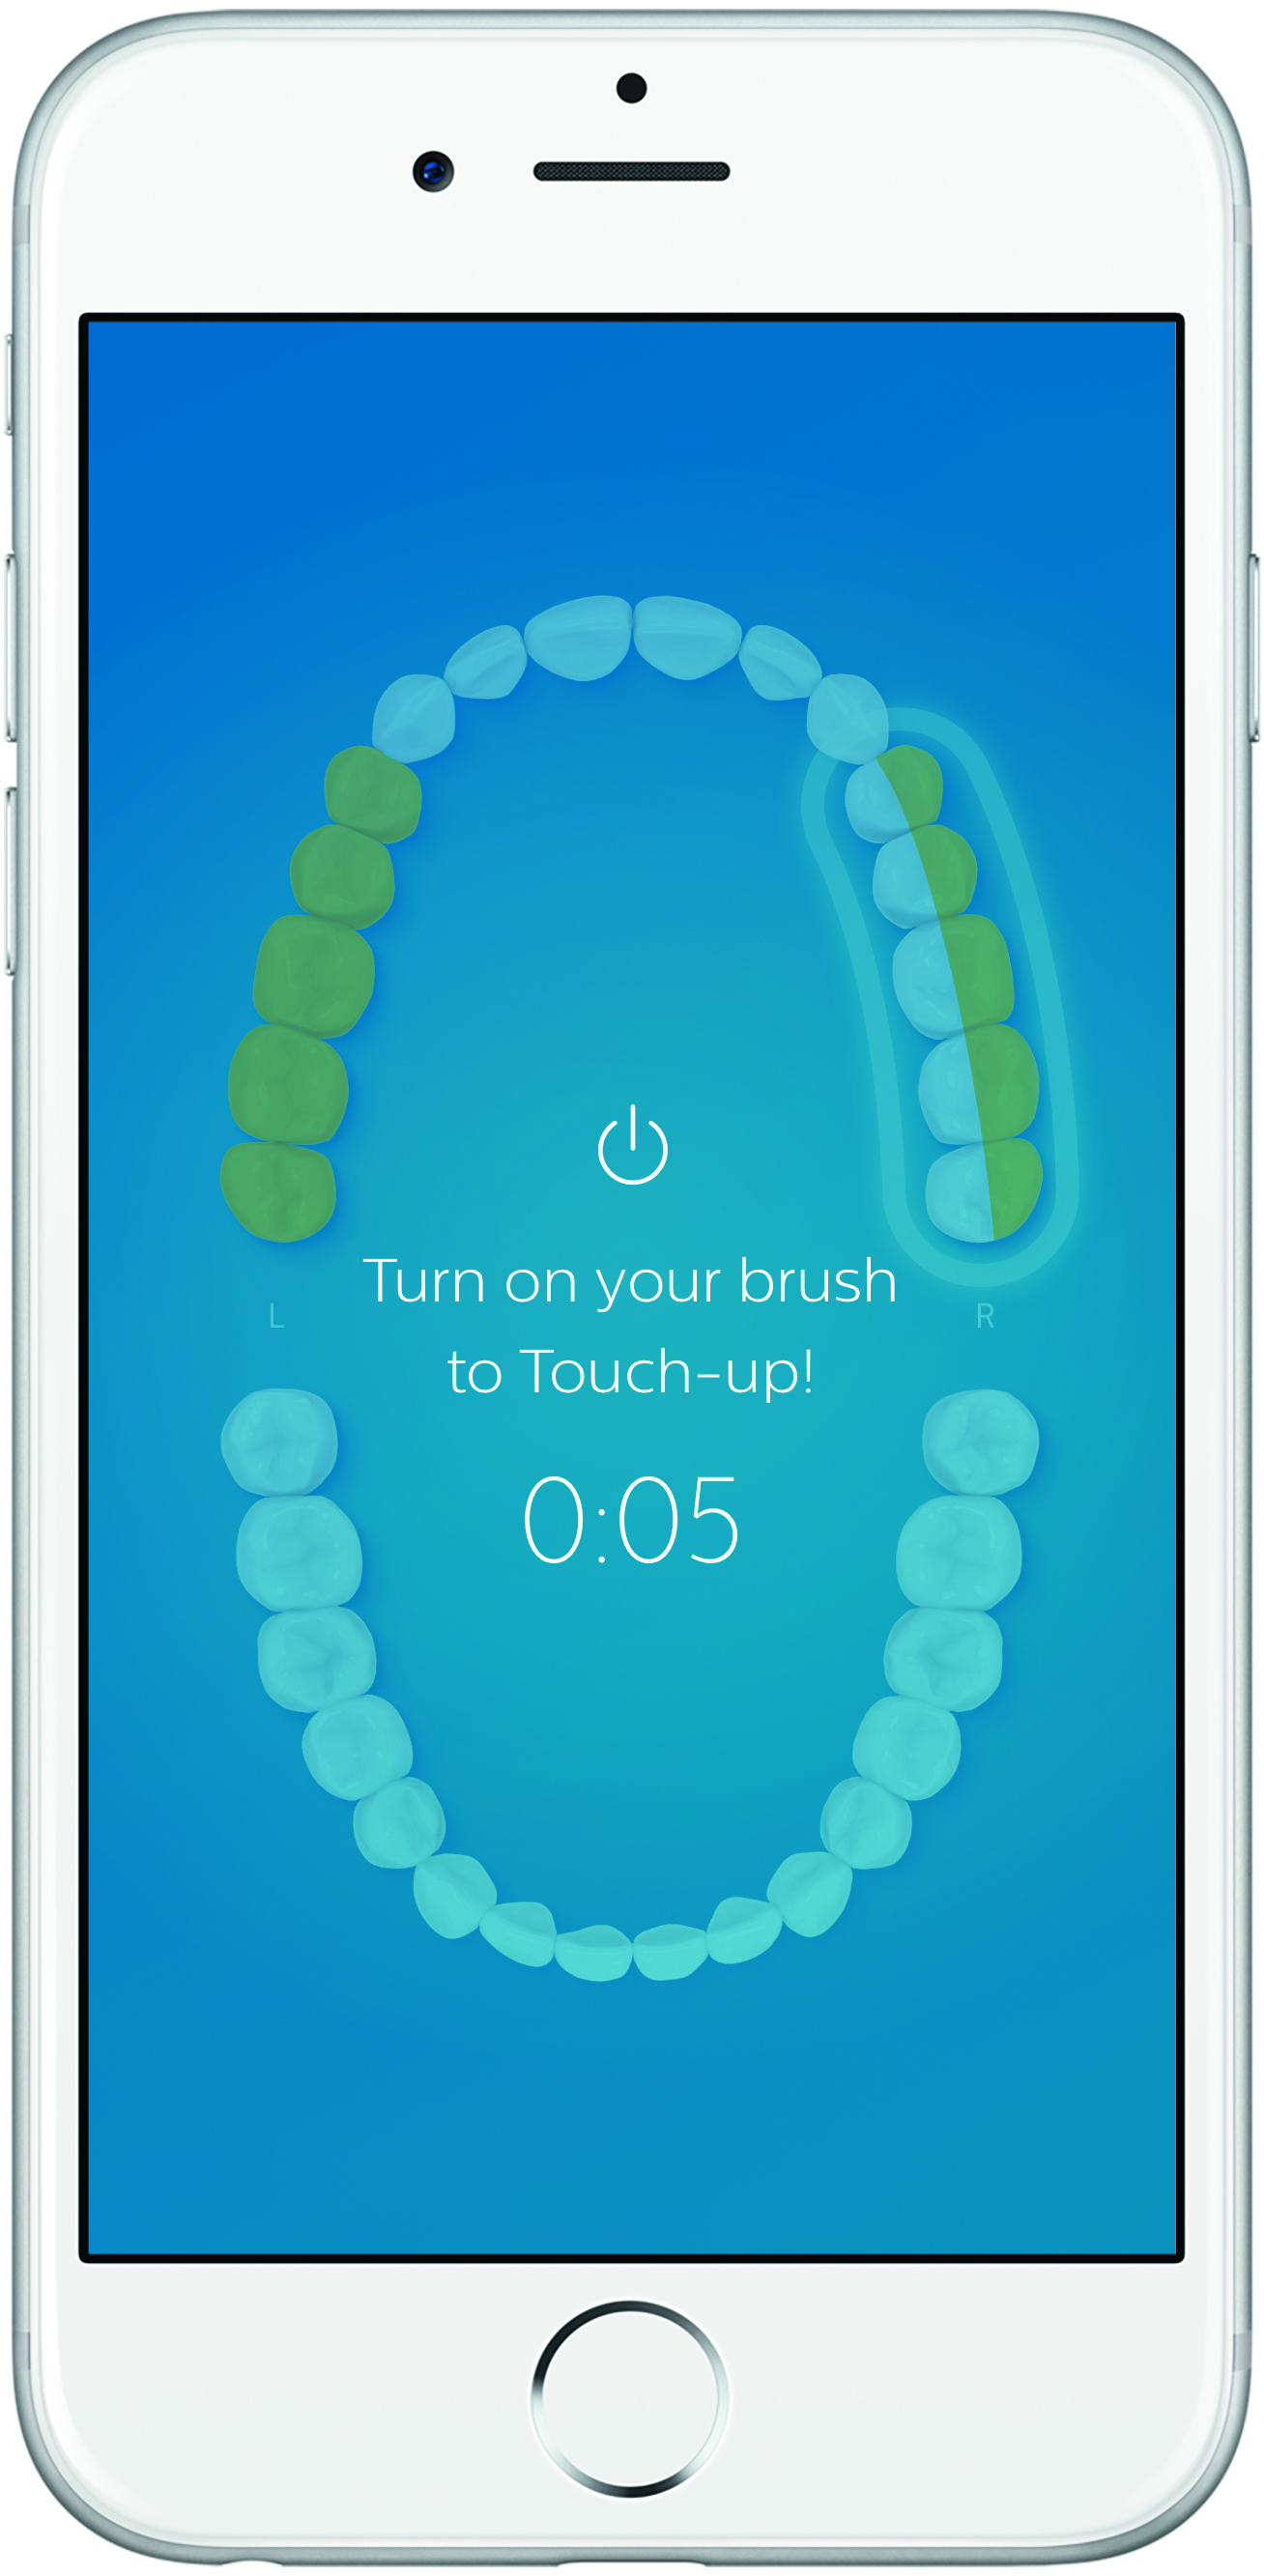 Figure 3. Real-time feedback showing activation of the Touch-up feature